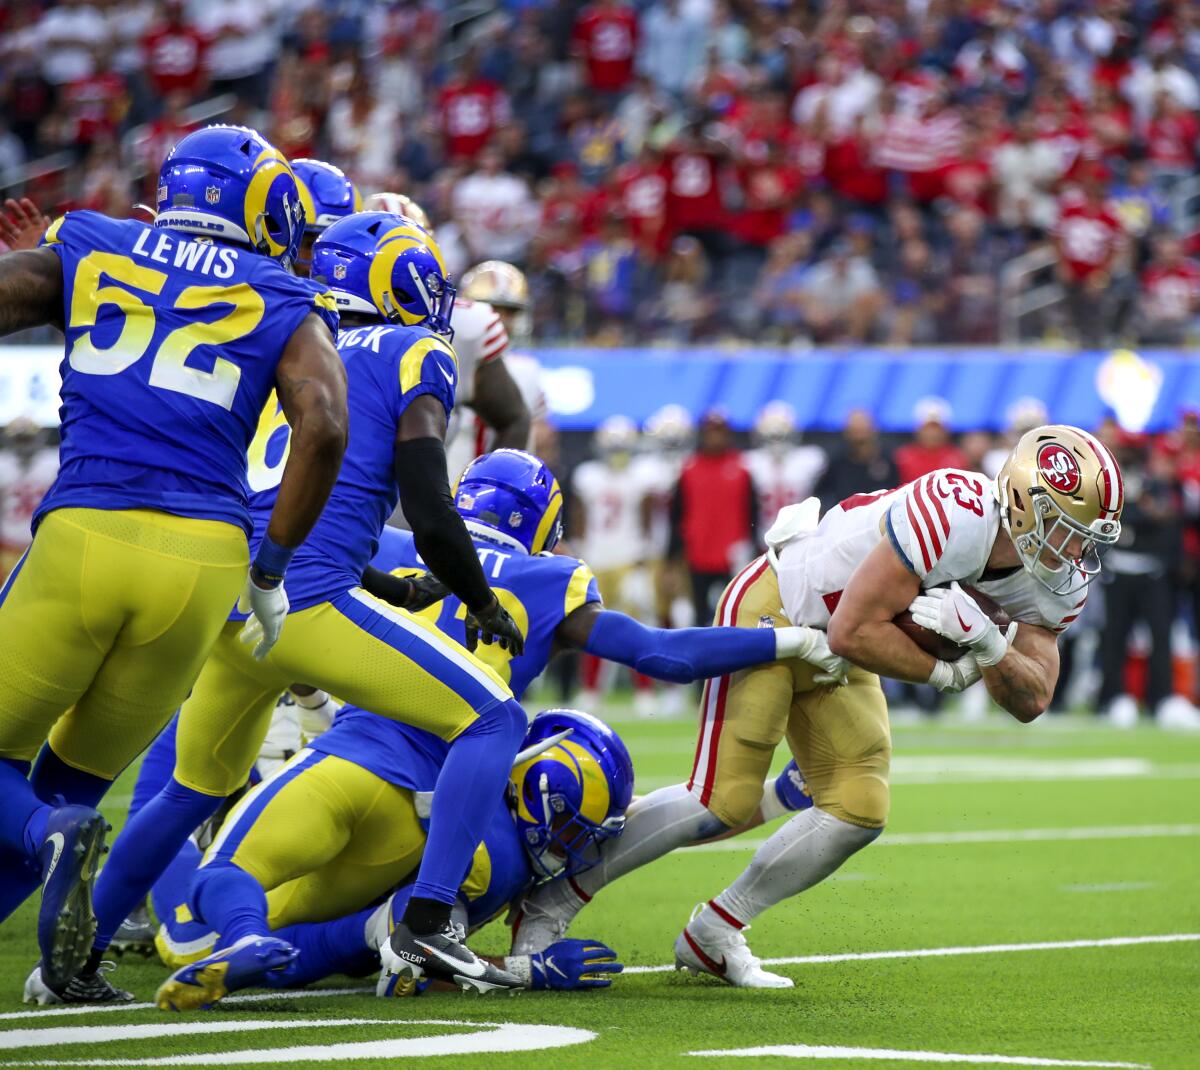 San Francisco running back Christian McCaffrey (23) breaks away from the Rams defense in the fourth quarter.